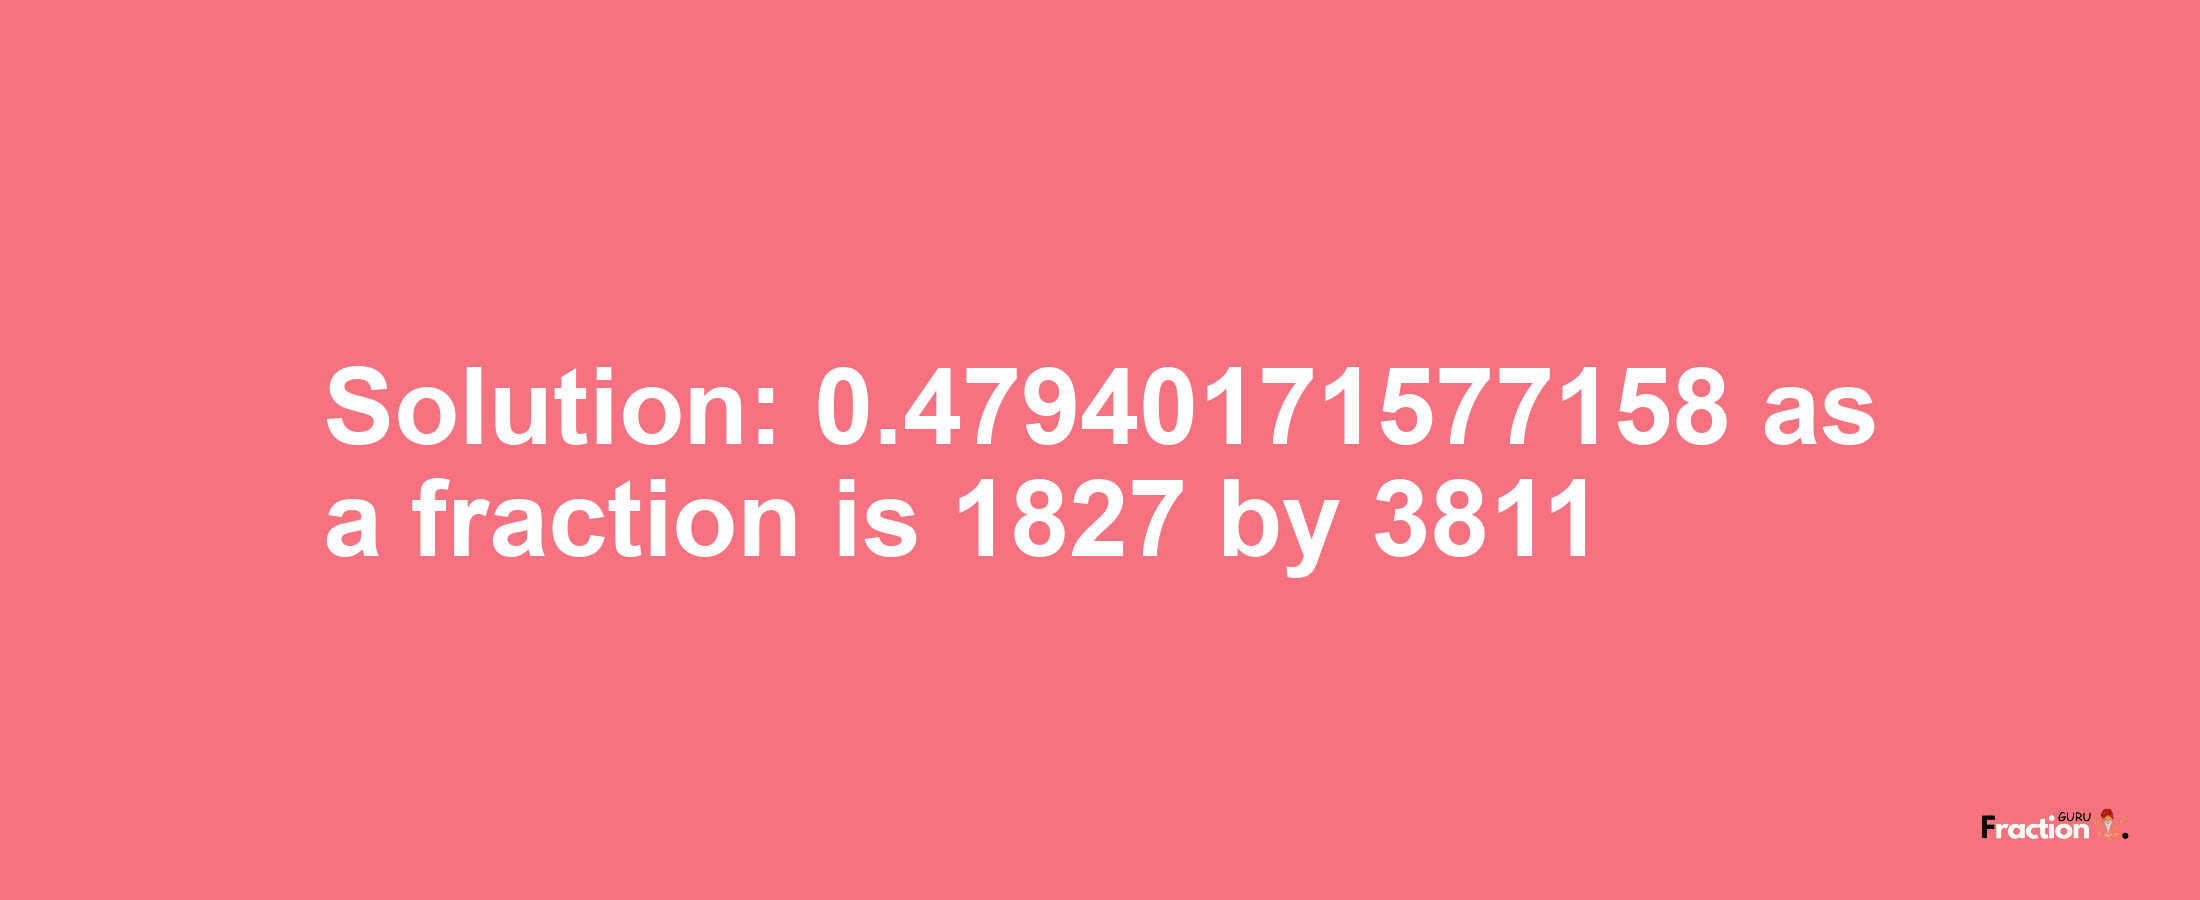 Solution:0.47940171577158 as a fraction is 1827/3811